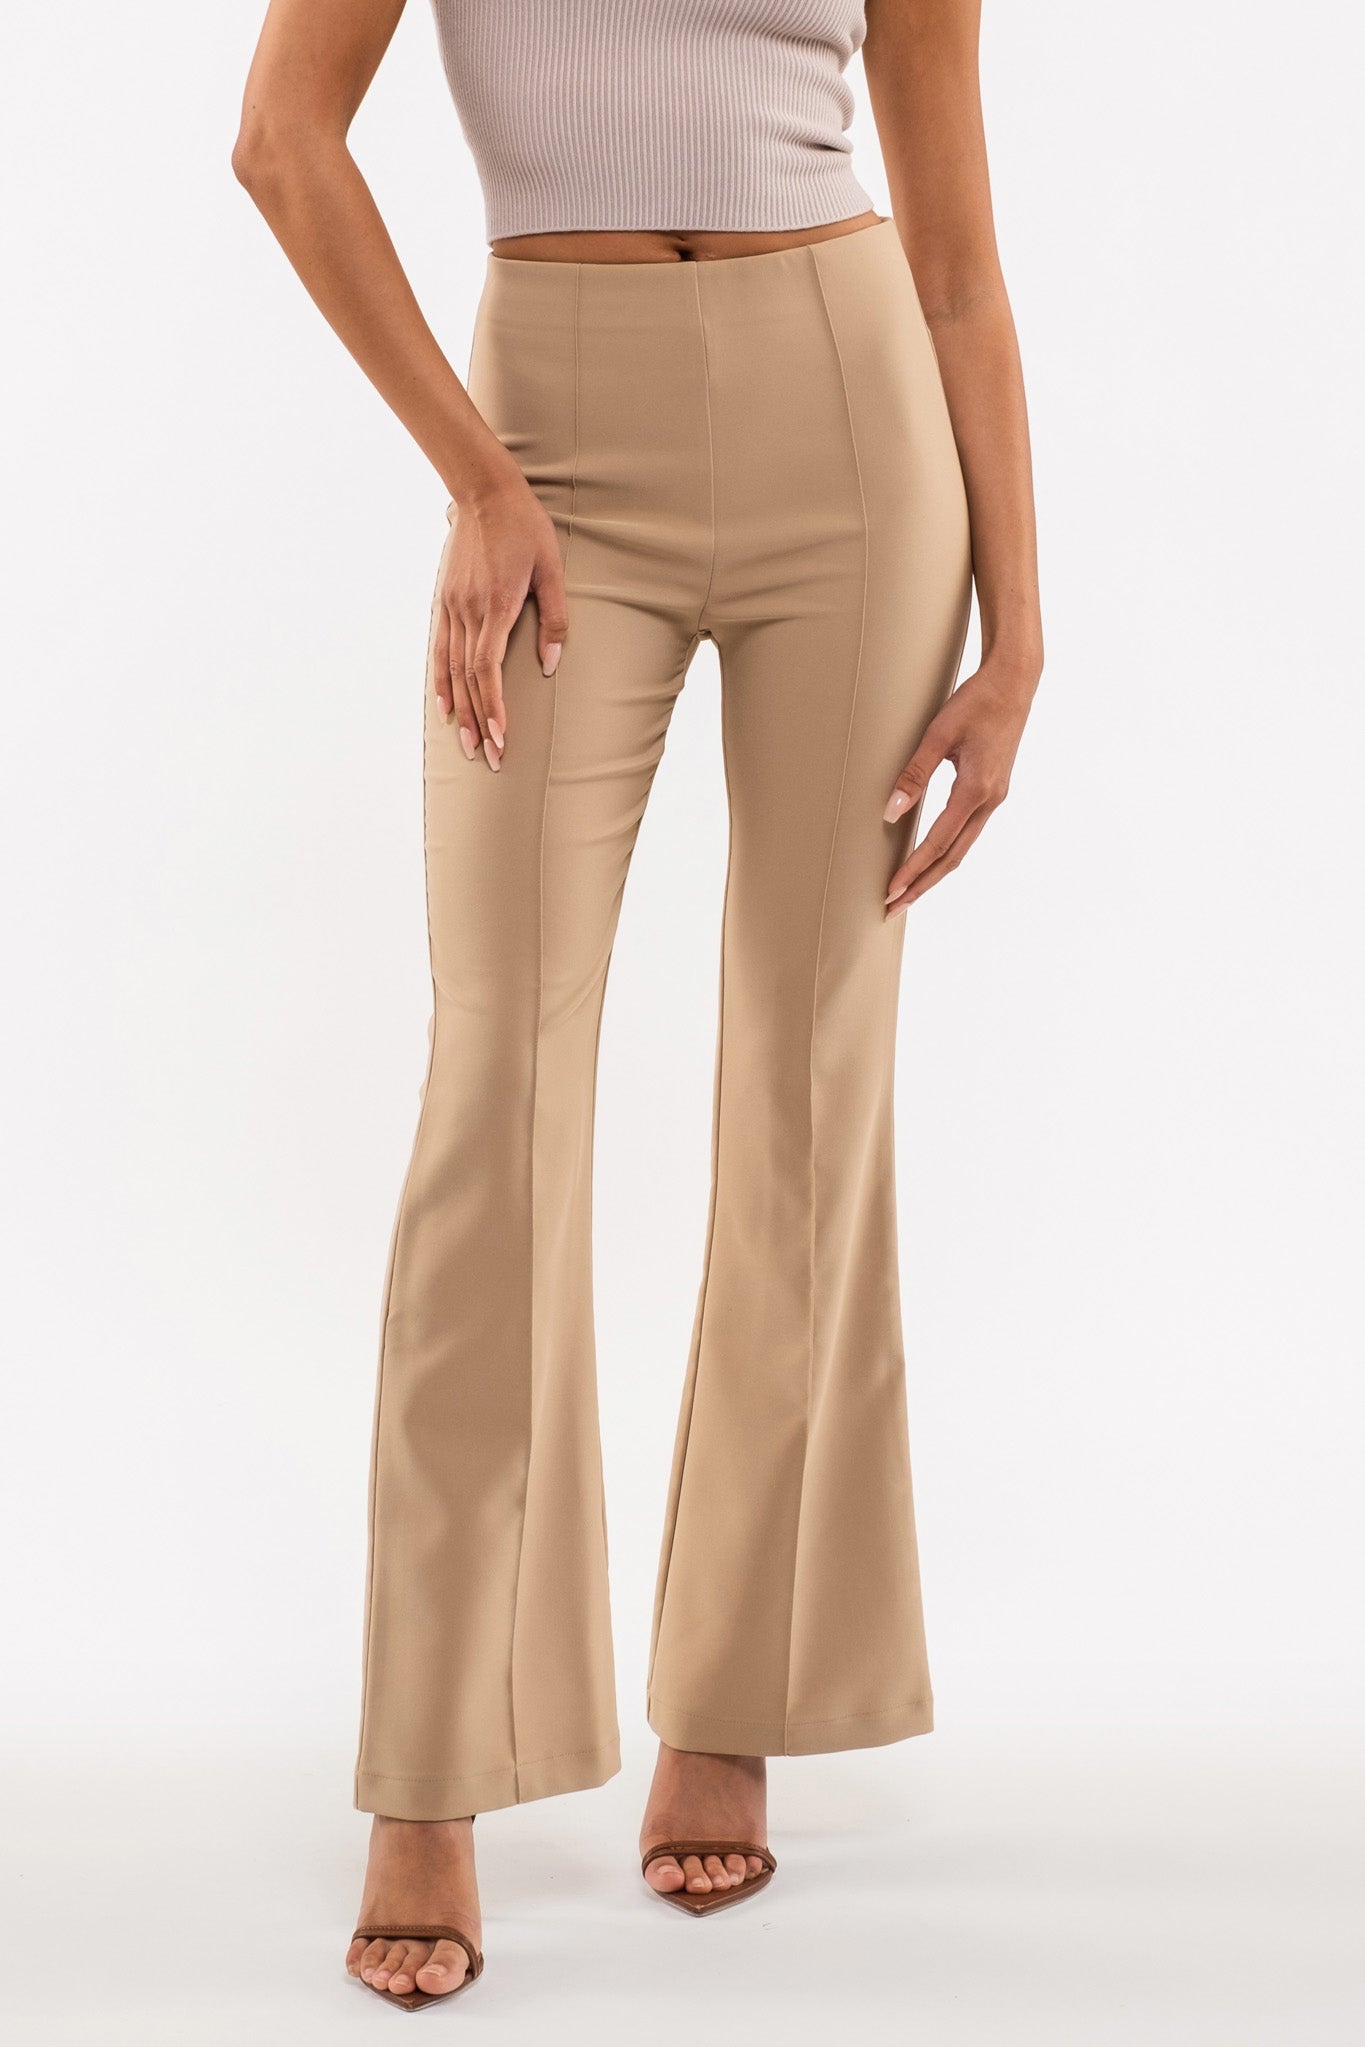 Buy SOLID ORANGE HIGH-RISE FLARED TROUSER for Women Online in India